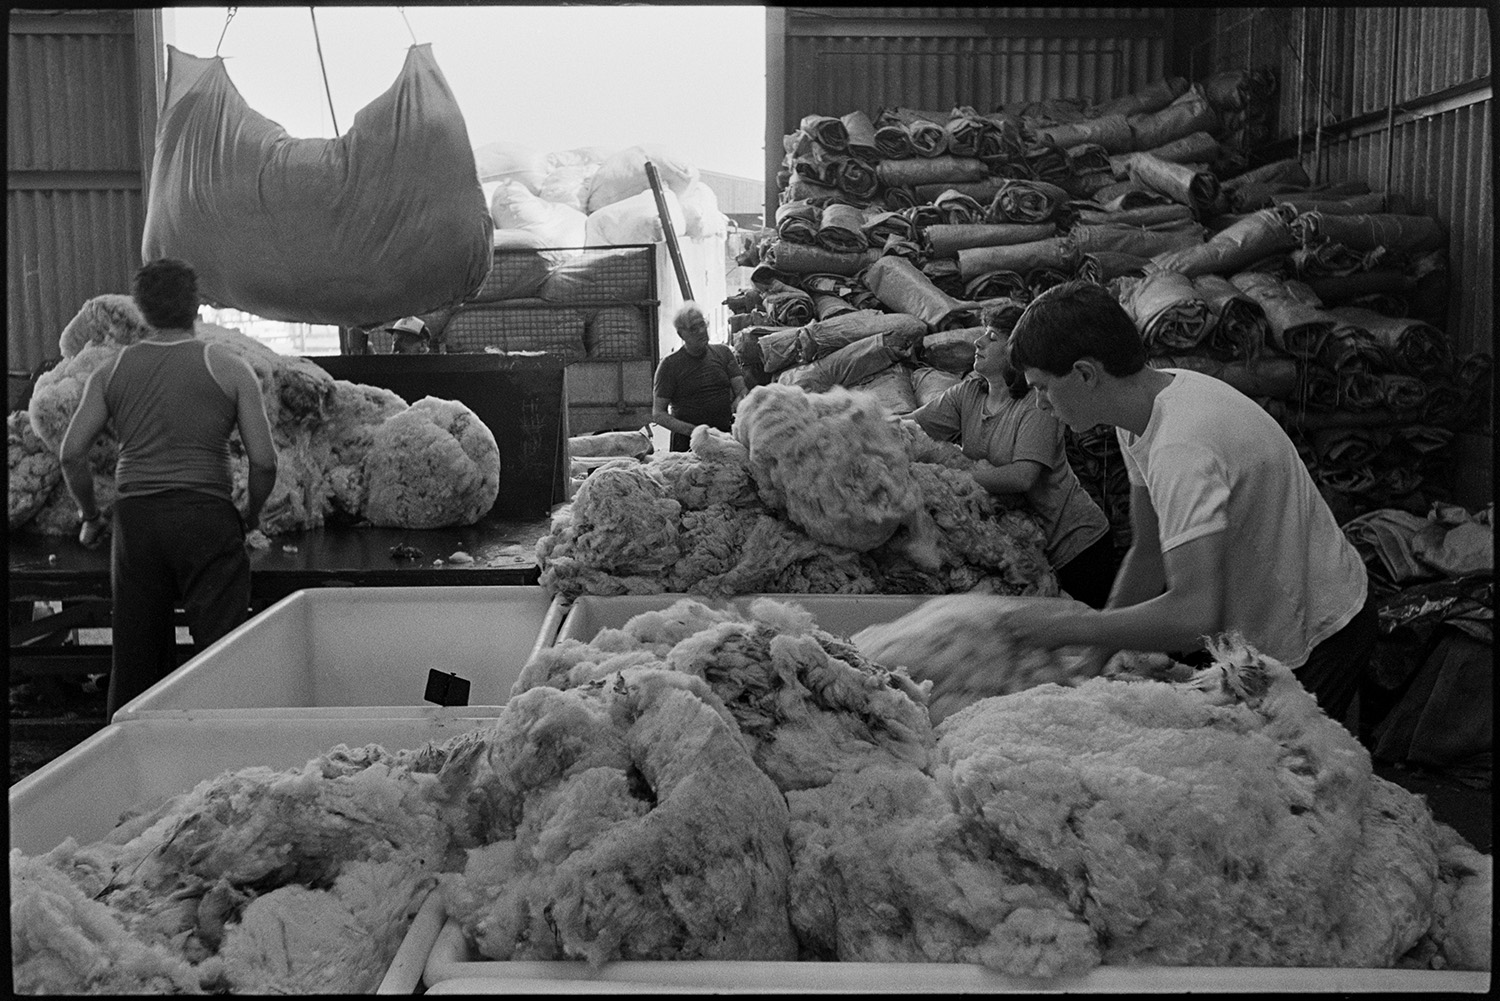 Men sorting and packing wool in warehouse.
[Three men and a woman sorting and packing wool in a warehouse operated by Devon & Cornwall Wools Ltd at the Pathfields Business Park in South Molton.]